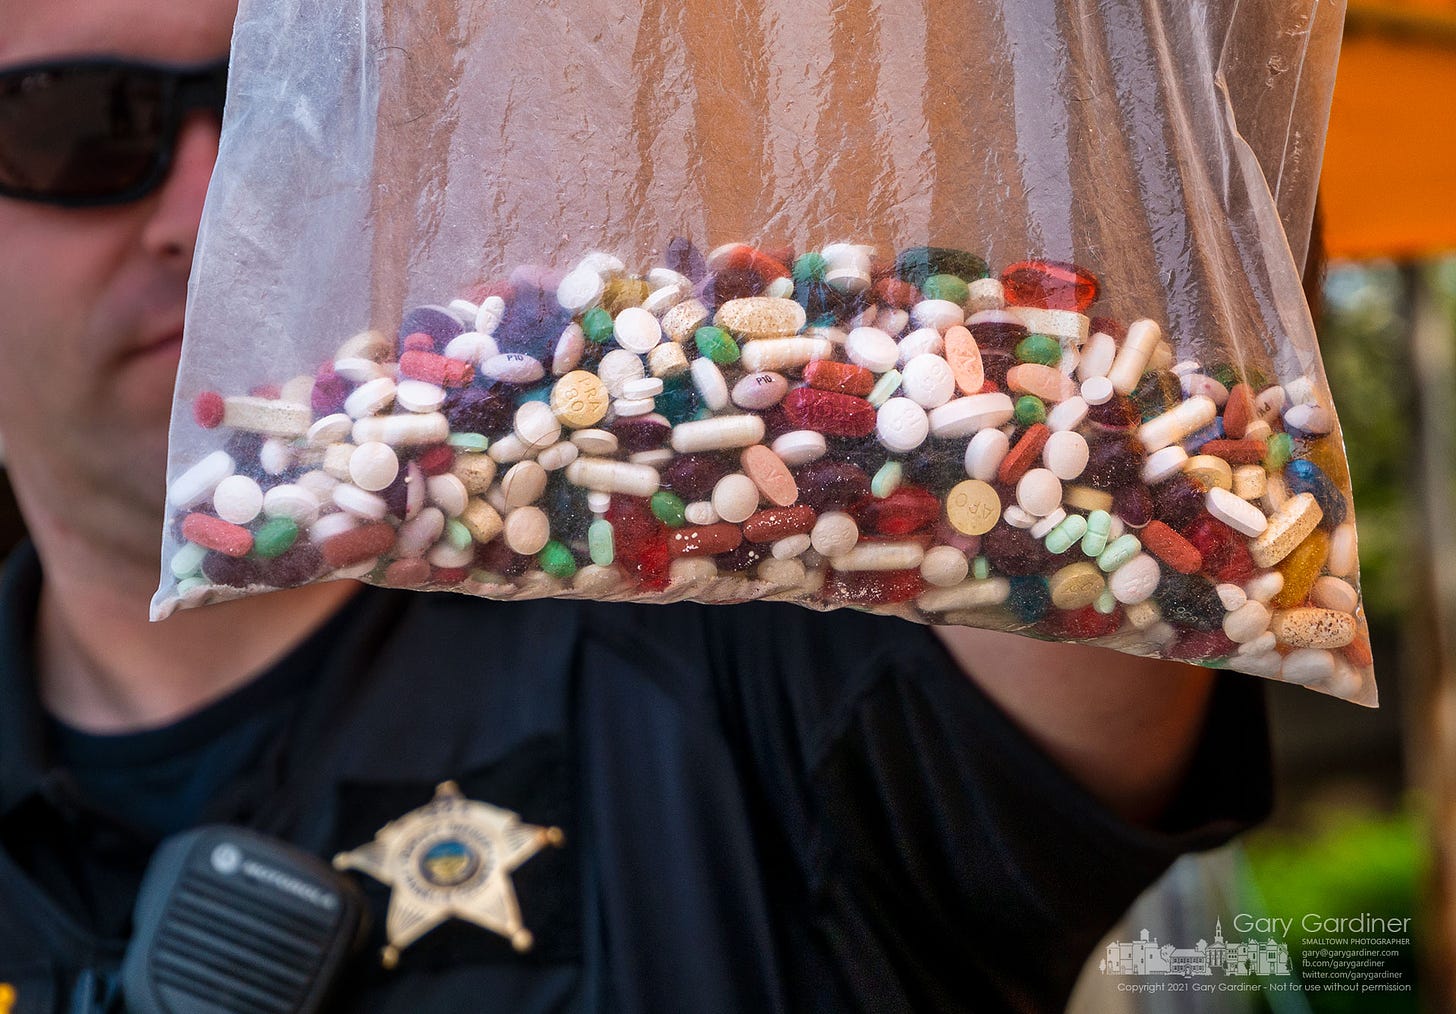 A Franklin County Deputy Sheriff holds a plastic bag containing unused, expired, or not needed prescription and over-the-counter drugs dropped off in the drive-thru at the Kroger on Schrock Road during Saturday's event sponsored by the Ohio Attorney General. My Final Photo for July 31, 2021.